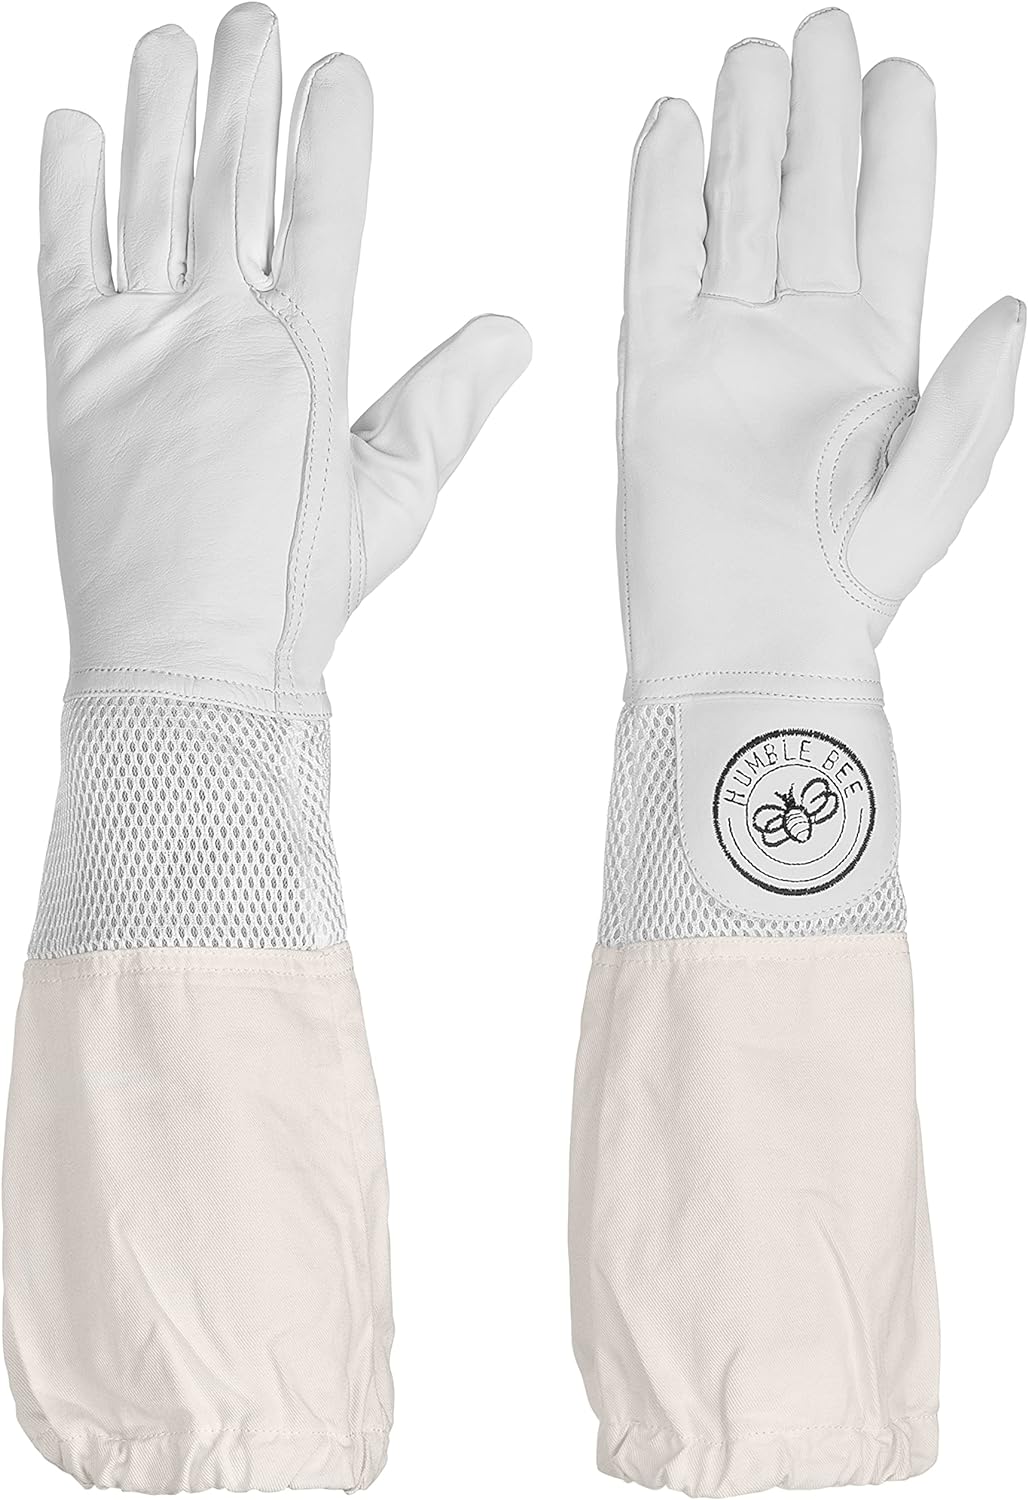 Humble Bee 112-XS Ventilated Beekeeping Gloves - Size XS